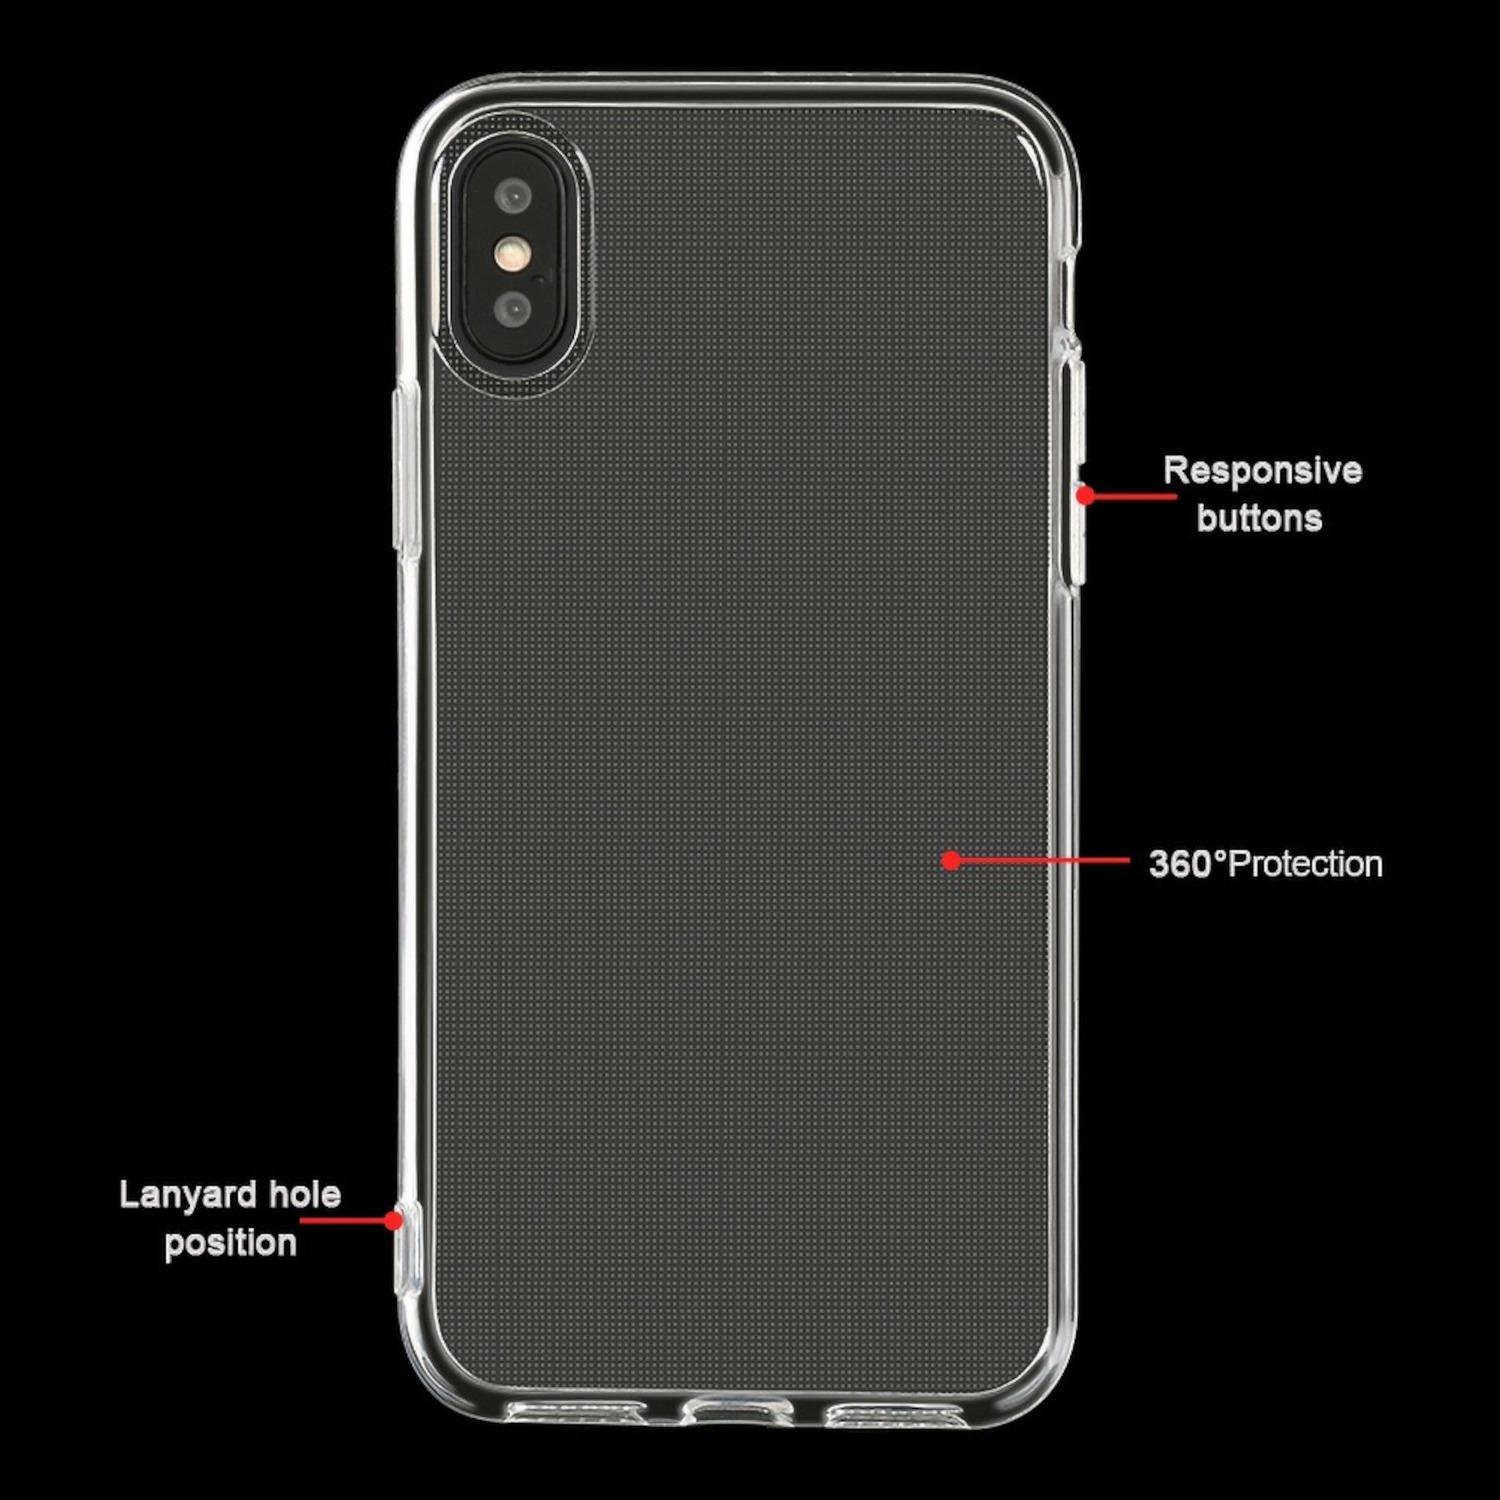 JAMCOVER 2.0 Backcover, SE 2022, SE SE, Case iPhone iPhone mm (3. Apple, iPhone Transparent iPhone Strong, Gen.), SE iPhone Gen.), iPhone 8, SE TPU iPhone 2020, (2. 7